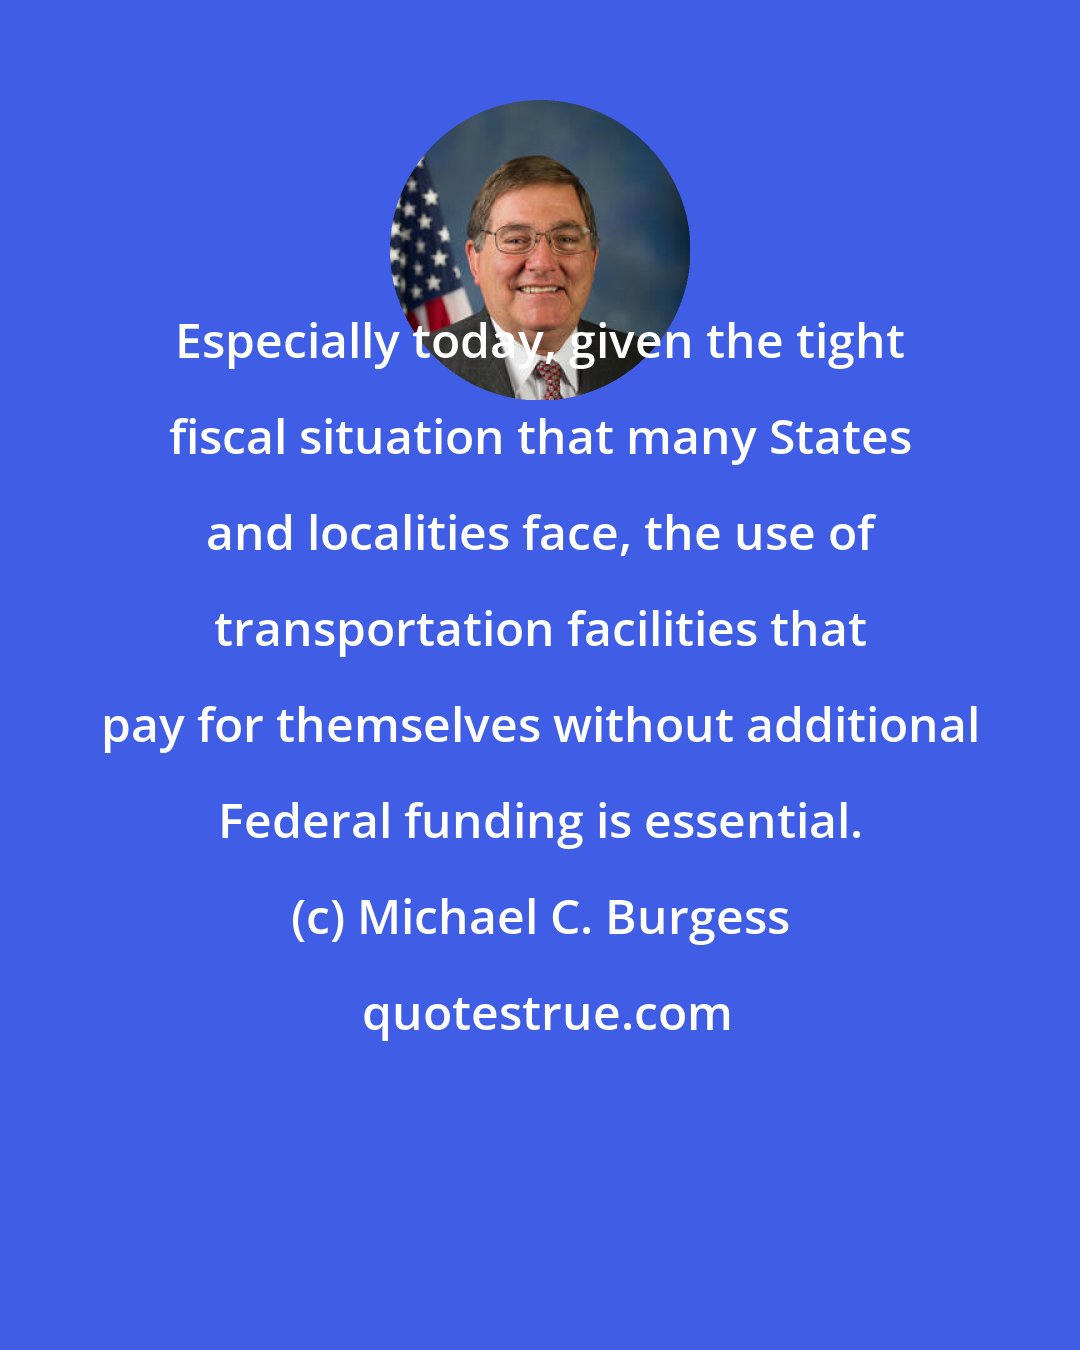 Michael C. Burgess: Especially today, given the tight fiscal situation that many States and localities face, the use of transportation facilities that pay for themselves without additional Federal funding is essential.